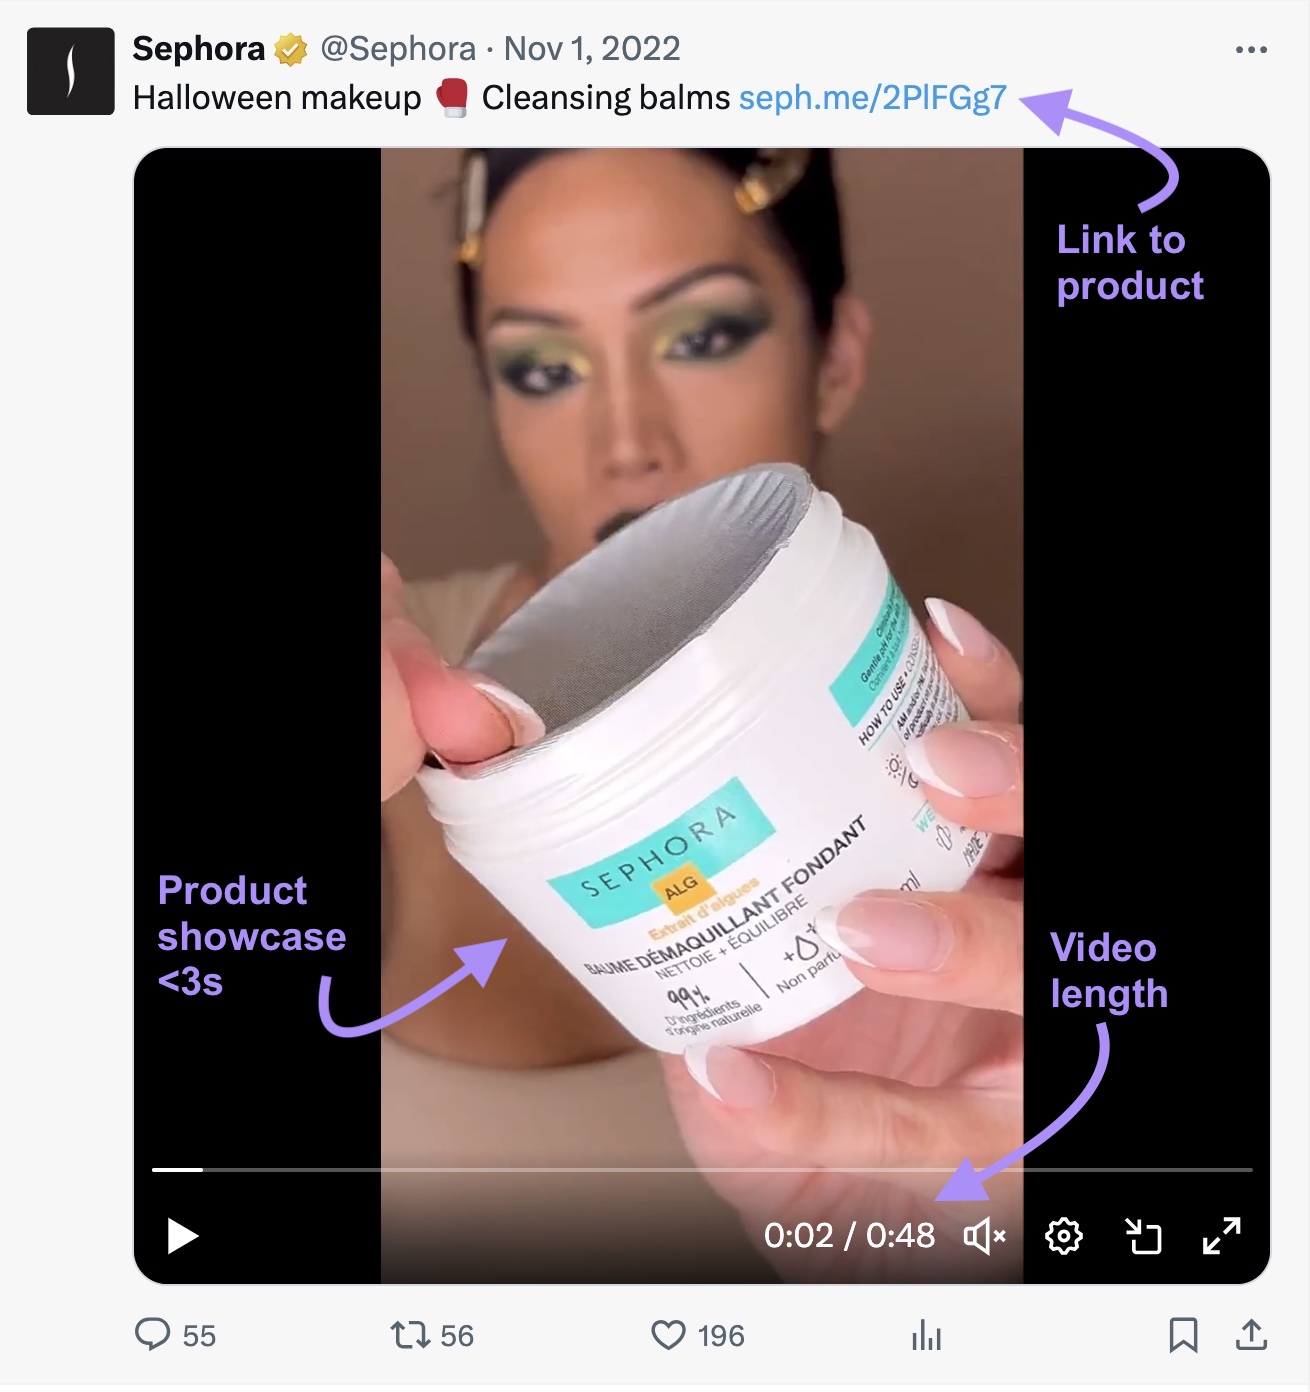 Sephora's video on X (formerly Twitter), with link to a product, product showcase and video length elements highlighted